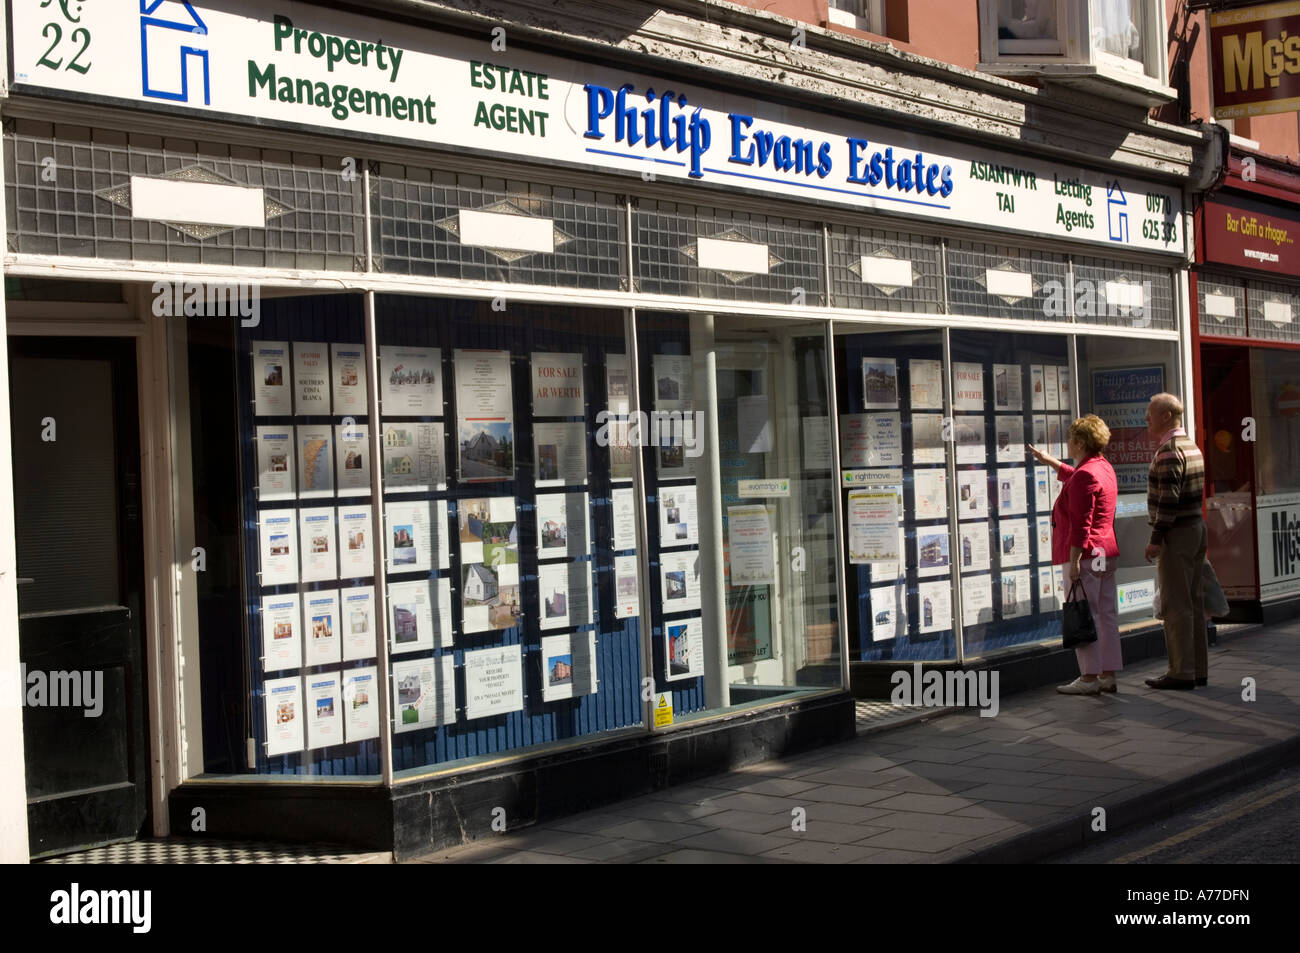 Middle aged couple looking at property details in the window of Philip  Evans estate agent, Aberystwyth Wales Stock Photo - Alamy